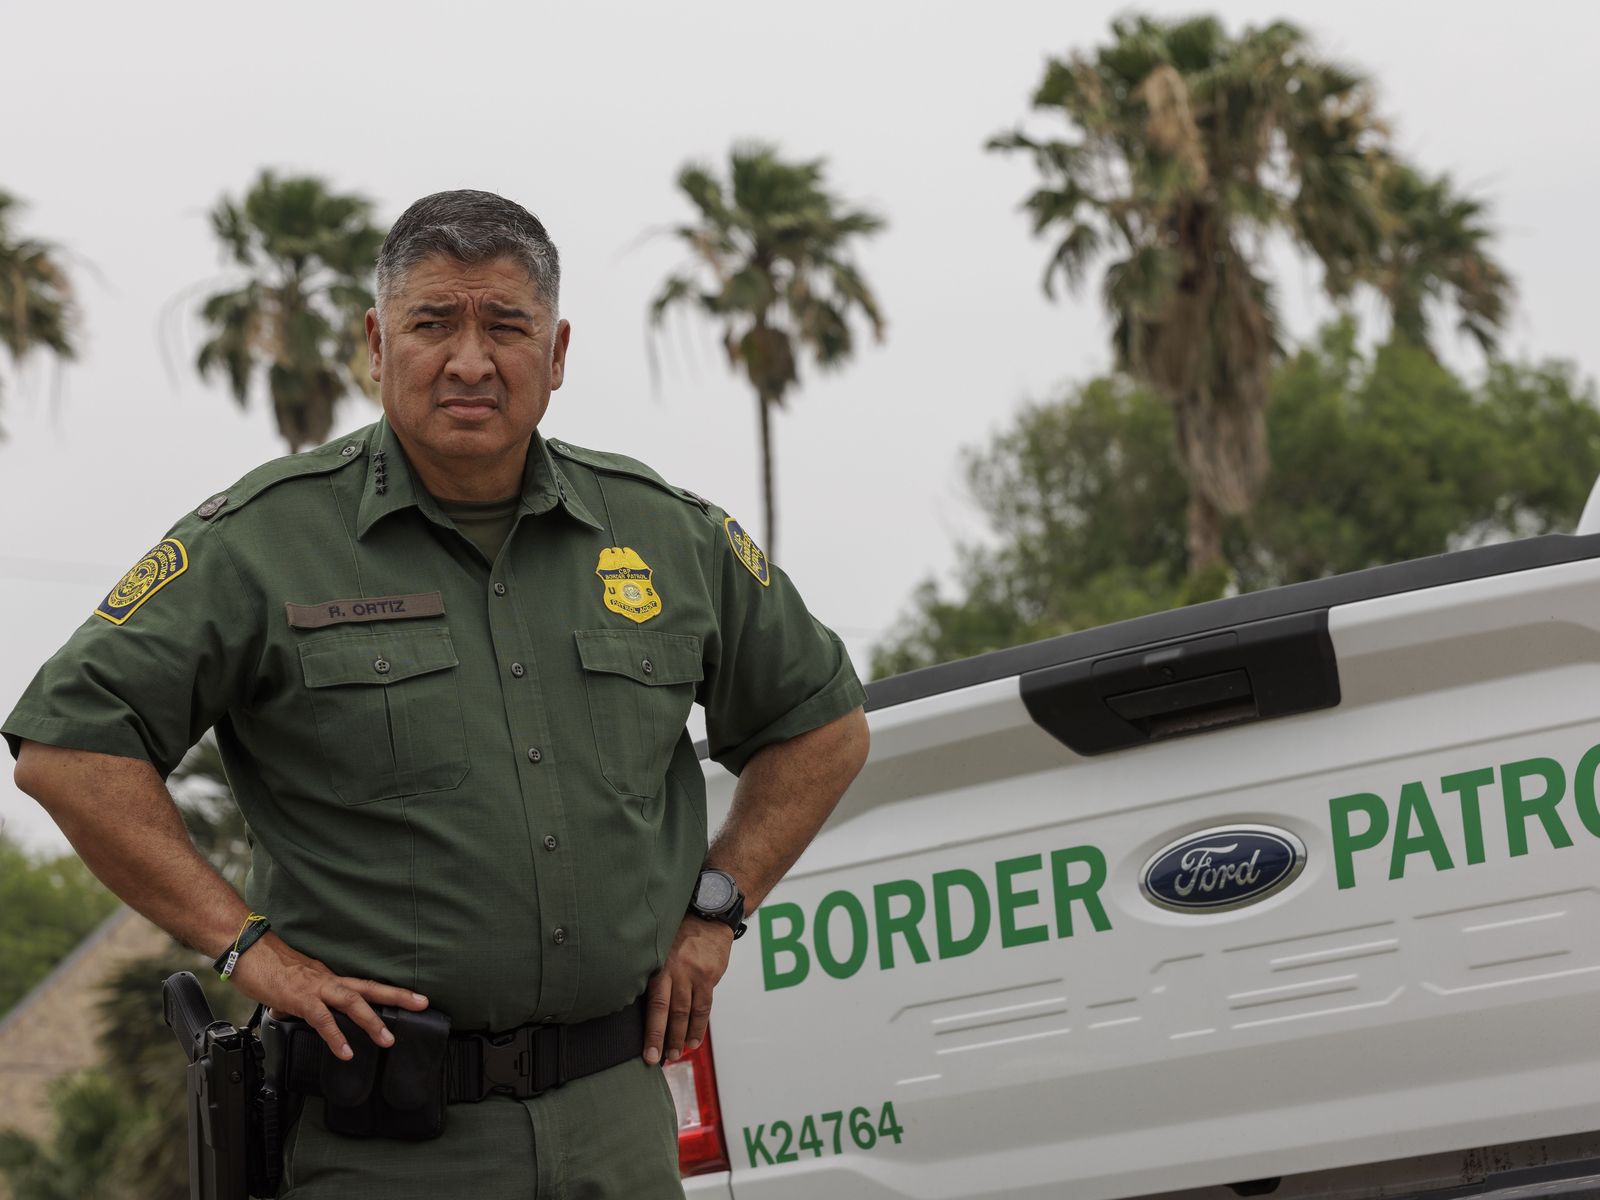 U.S. Border Patrol chief to retire after end of Title 42